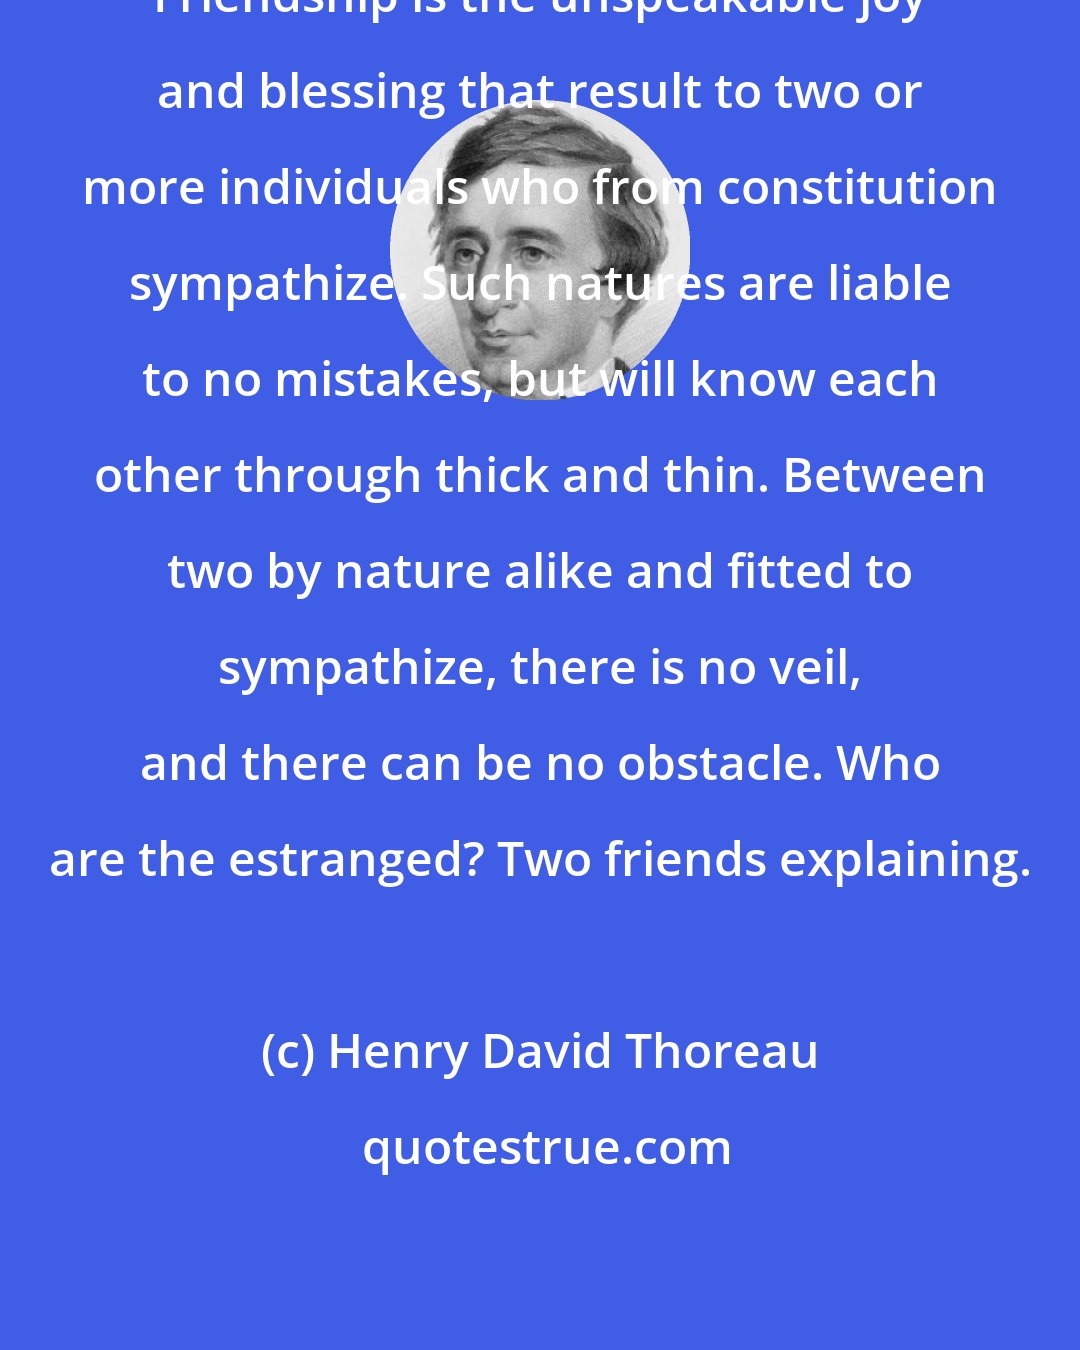 Henry David Thoreau: Friendship is the unspeakable joy and blessing that result to two or more individuals who from constitution sympathize. Such natures are liable to no mistakes, but will know each other through thick and thin. Between two by nature alike and fitted to sympathize, there is no veil, and there can be no obstacle. Who are the estranged? Two friends explaining.